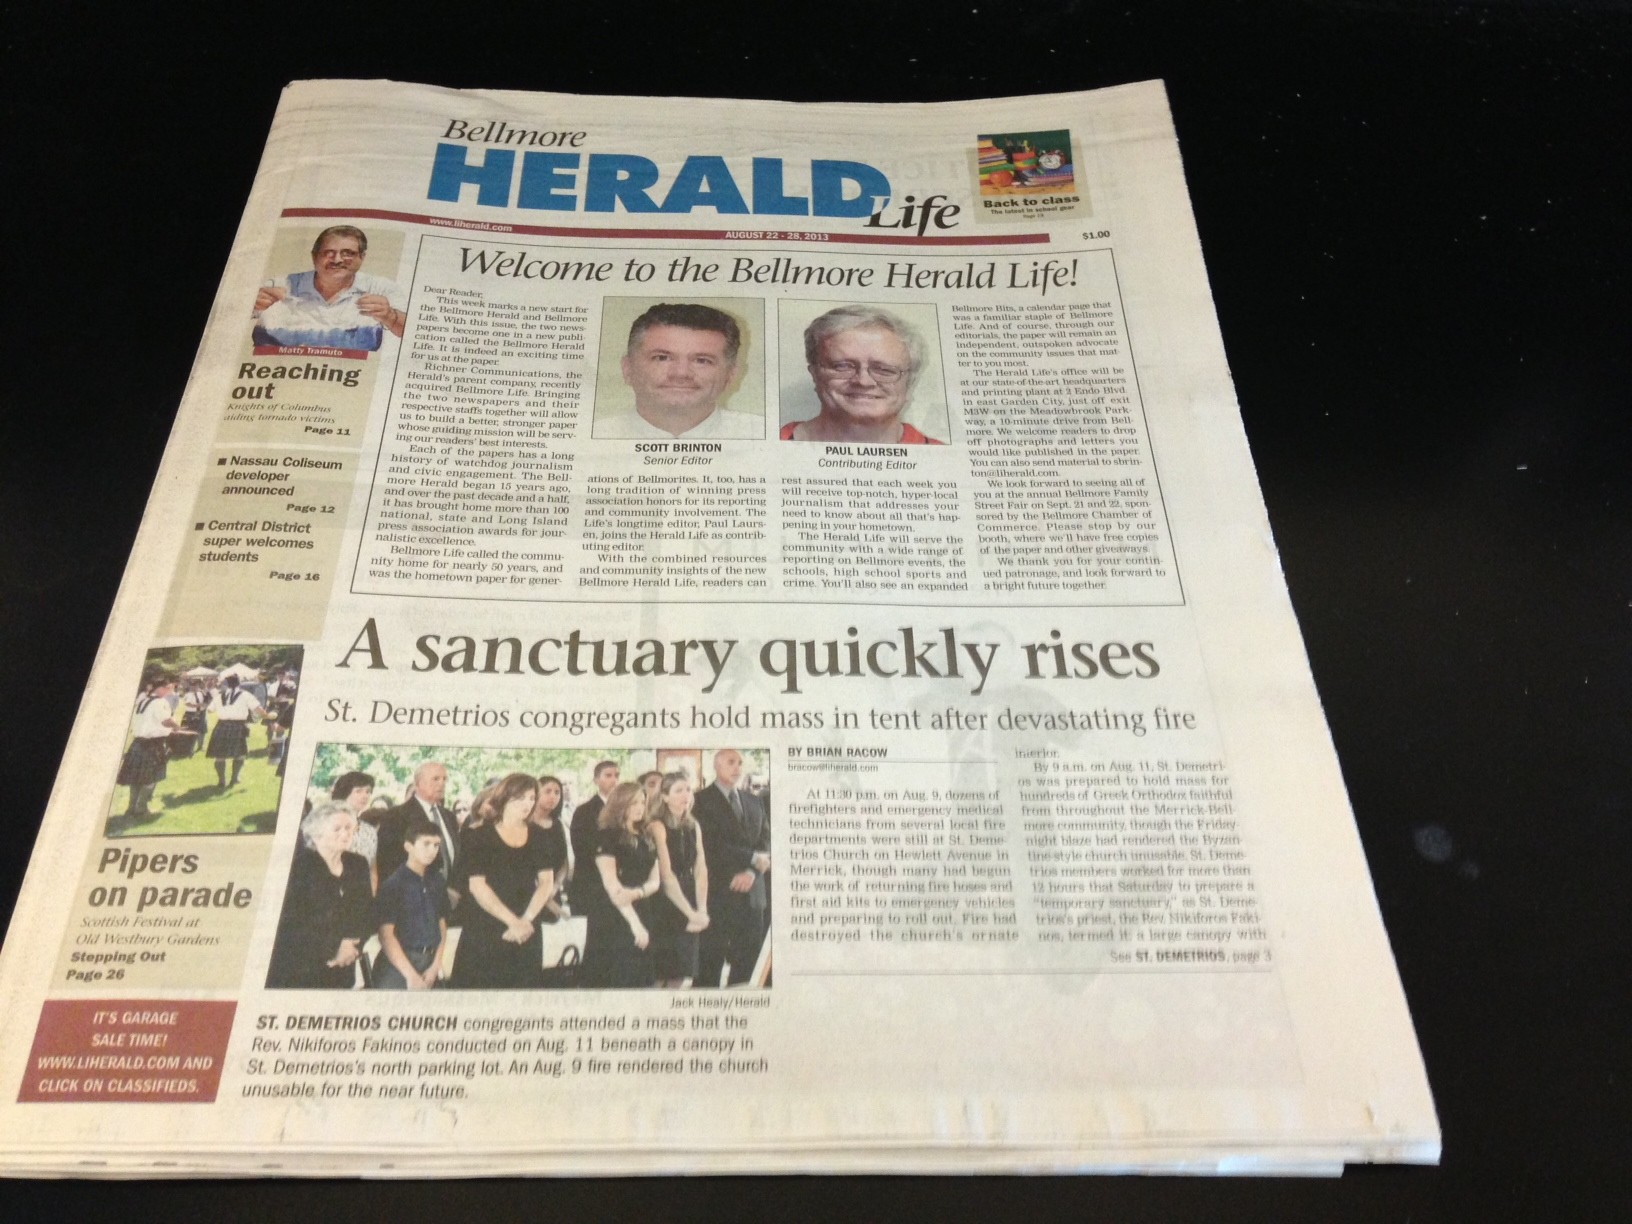 The new Bellmore Herald Life.